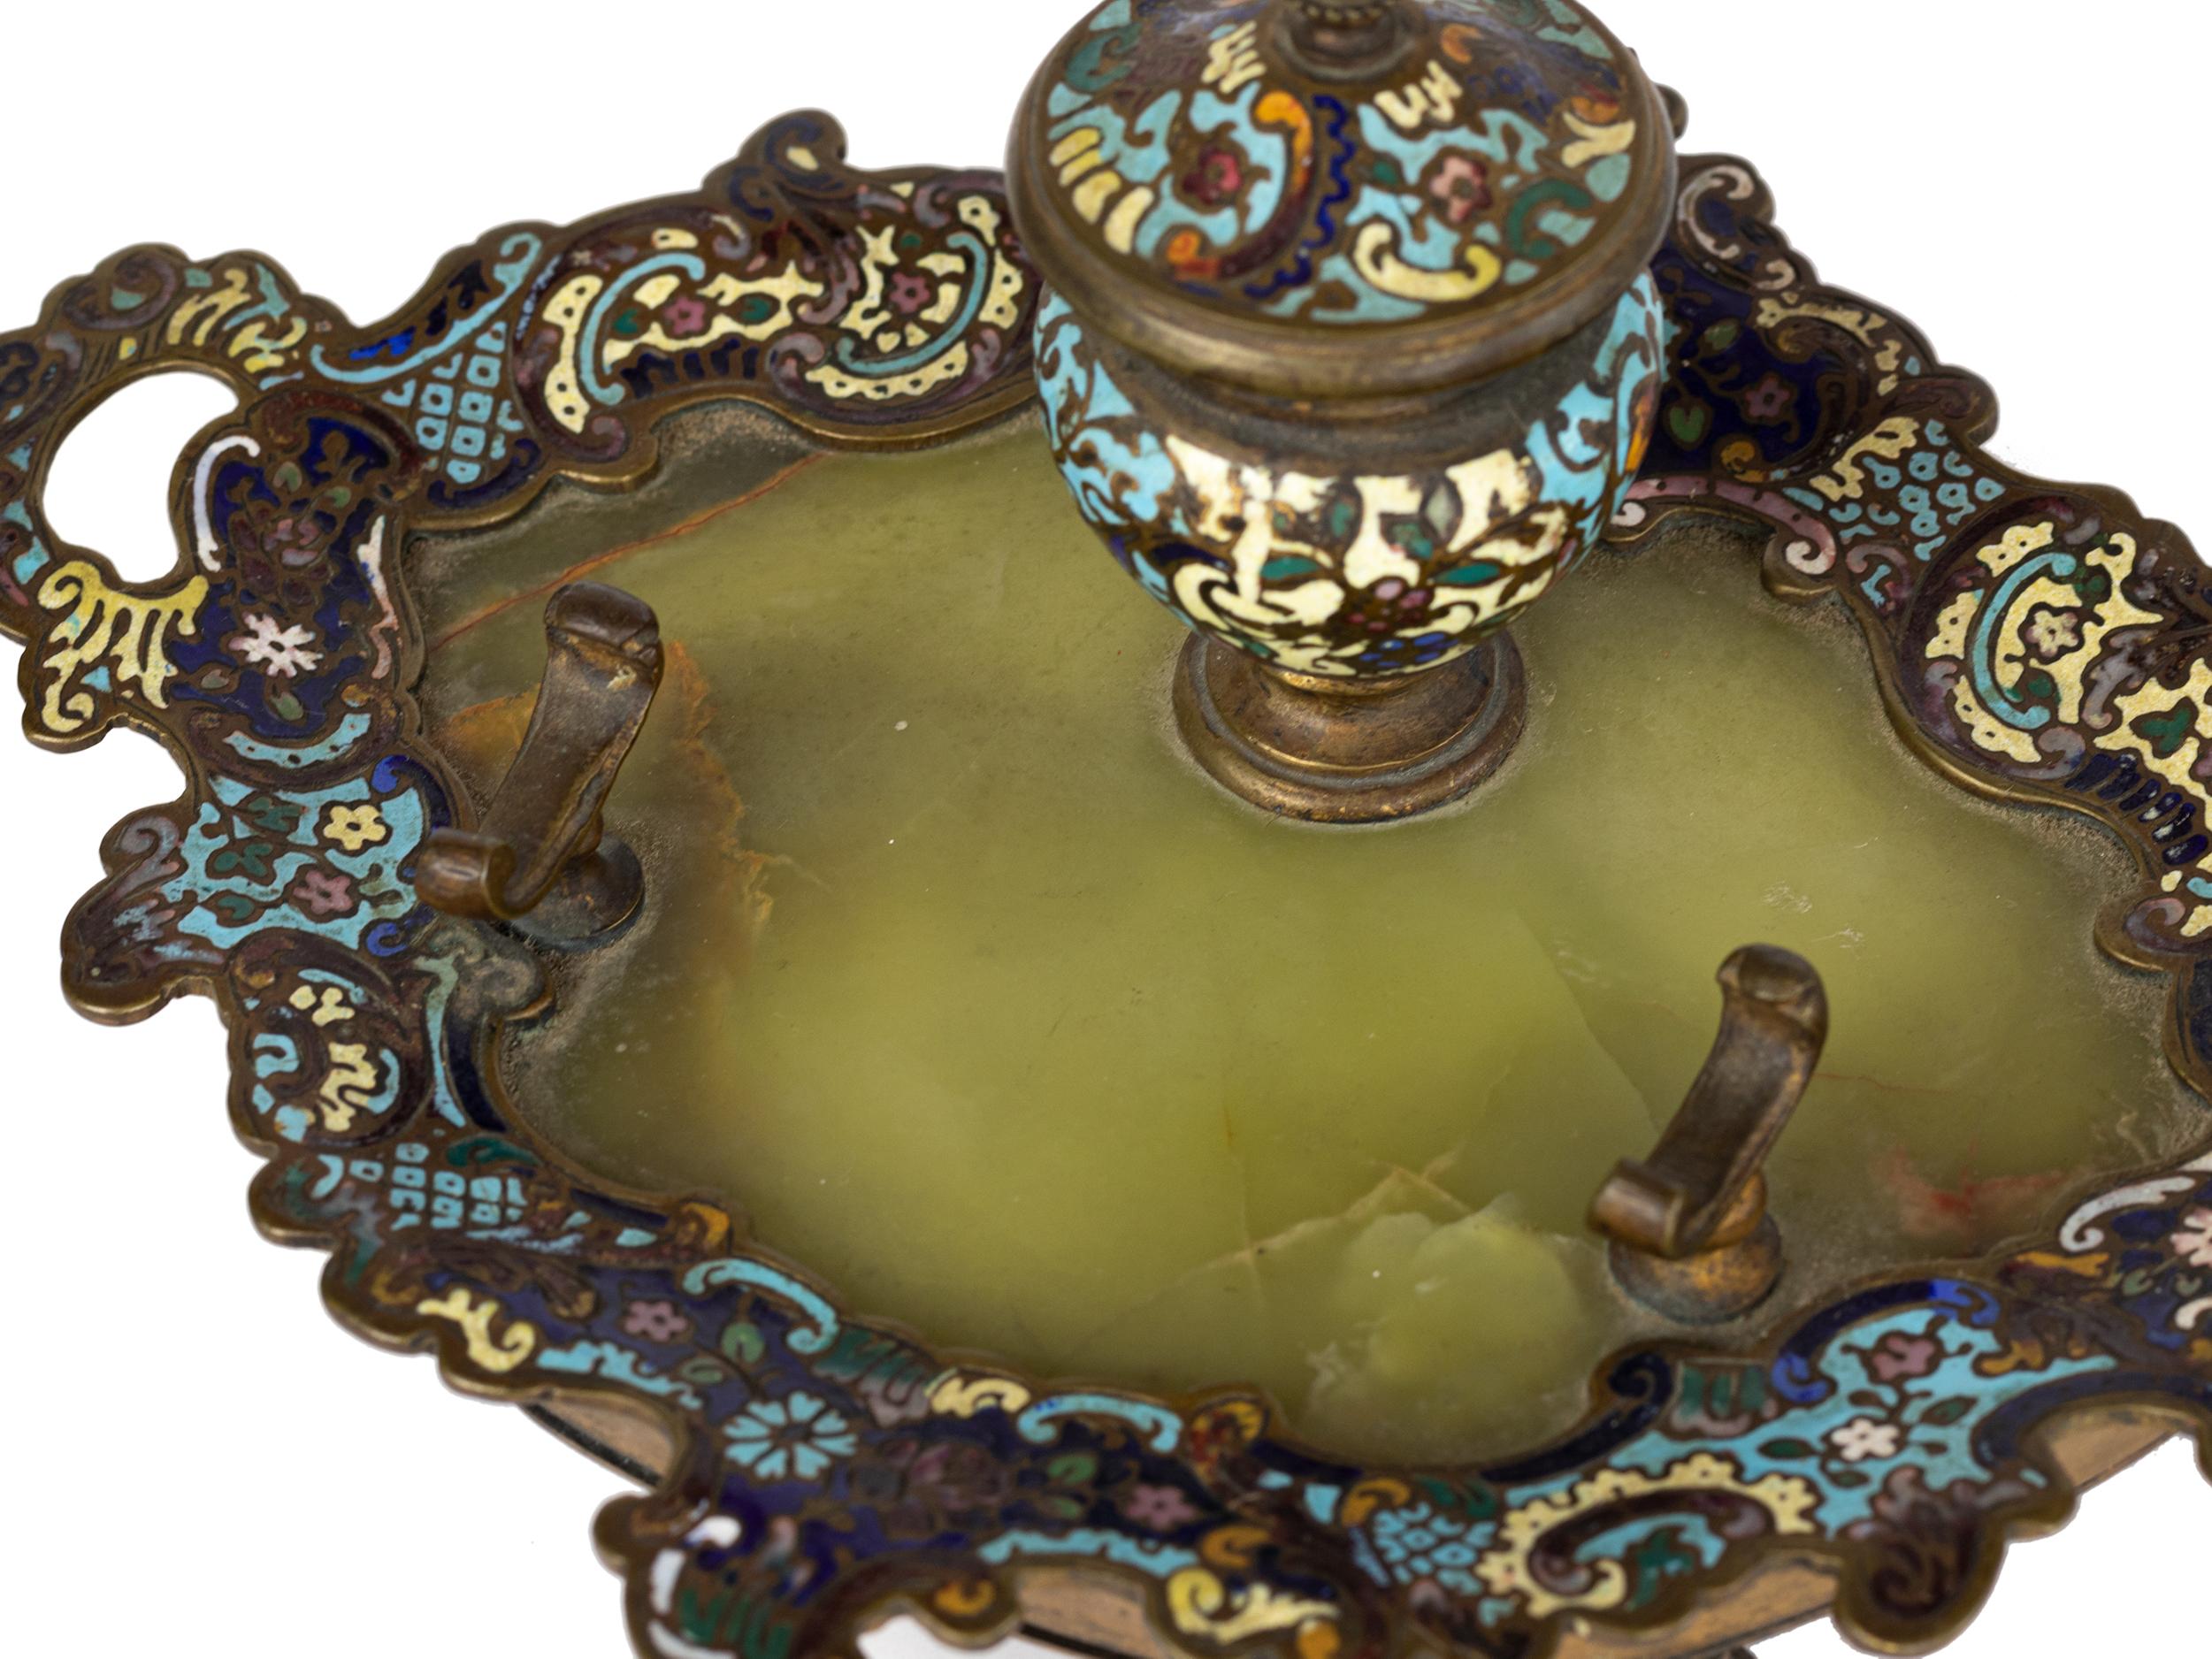 A 19th century french champlevé enameled gilt bronze ornate with colorful blue, green, yellow enameling over the bronze base in a Sevres style decor with a pen rest.  

Width: 8,07 in (20,5 cm)
Depth: 6,7 in (17 cm)
Height: aprox 3,54 in (9 cm)
Base